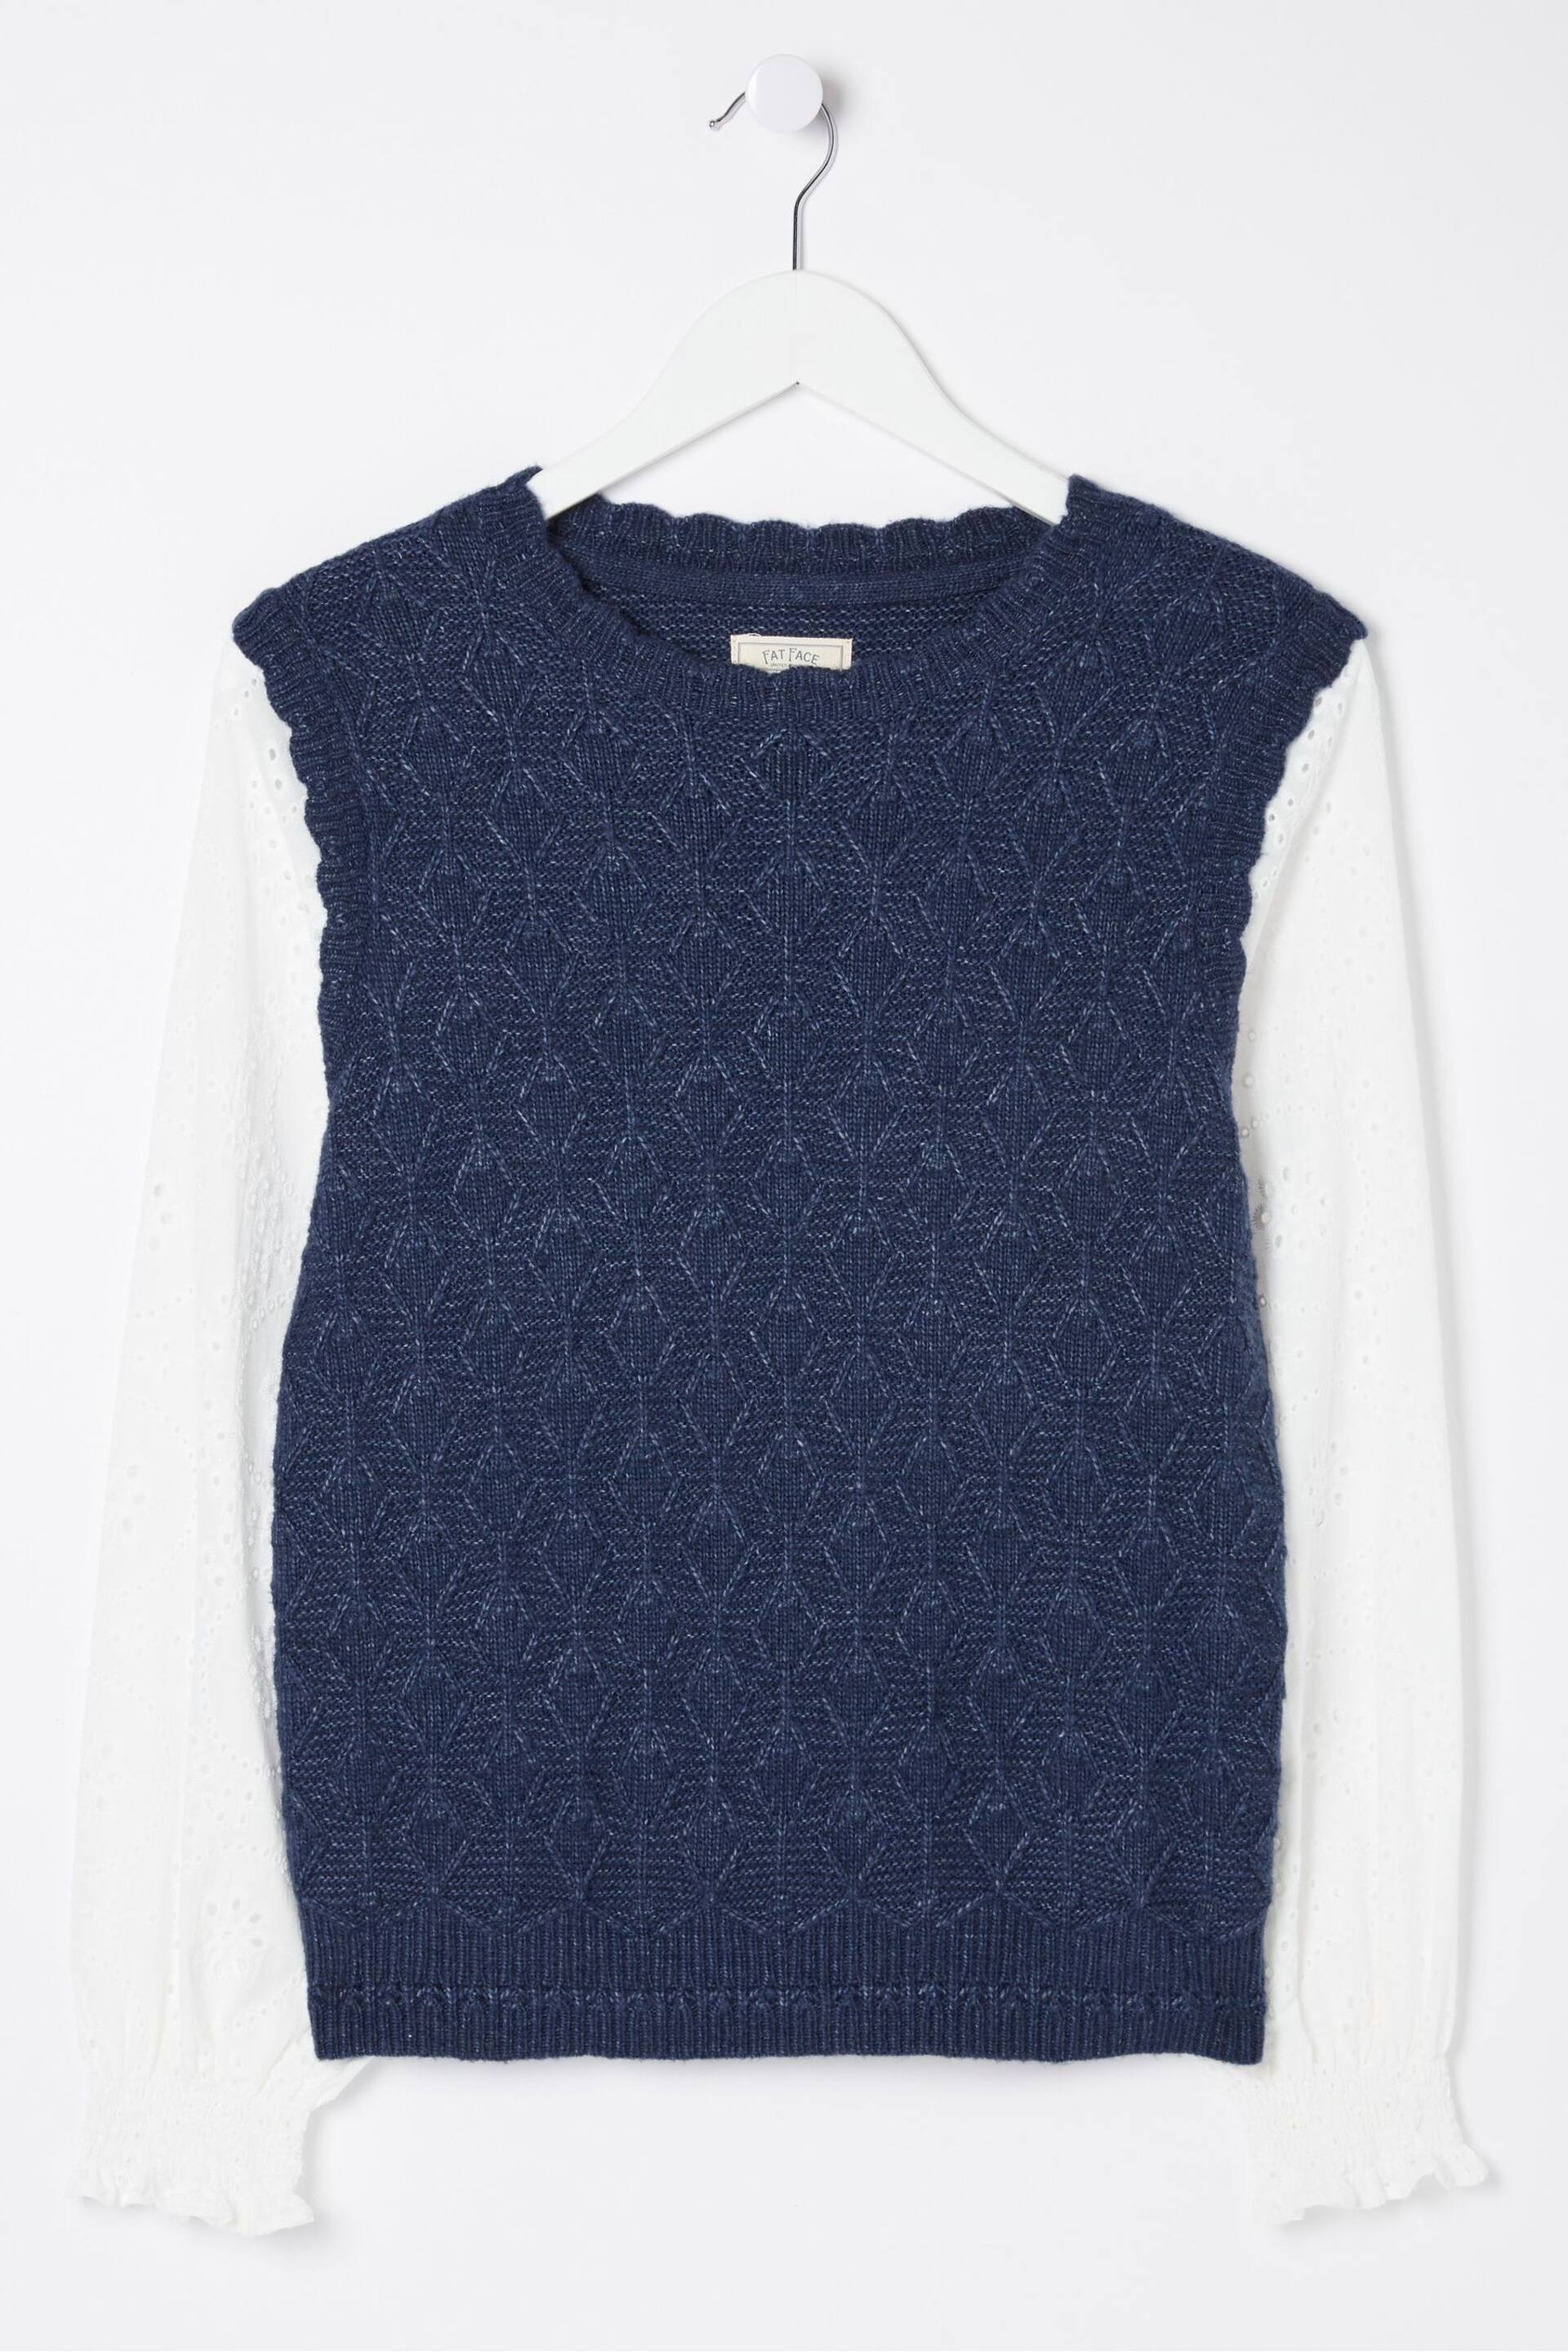 FatFace Blue Winona 2-In-1 Knitted Jumper - Image 5 of 5